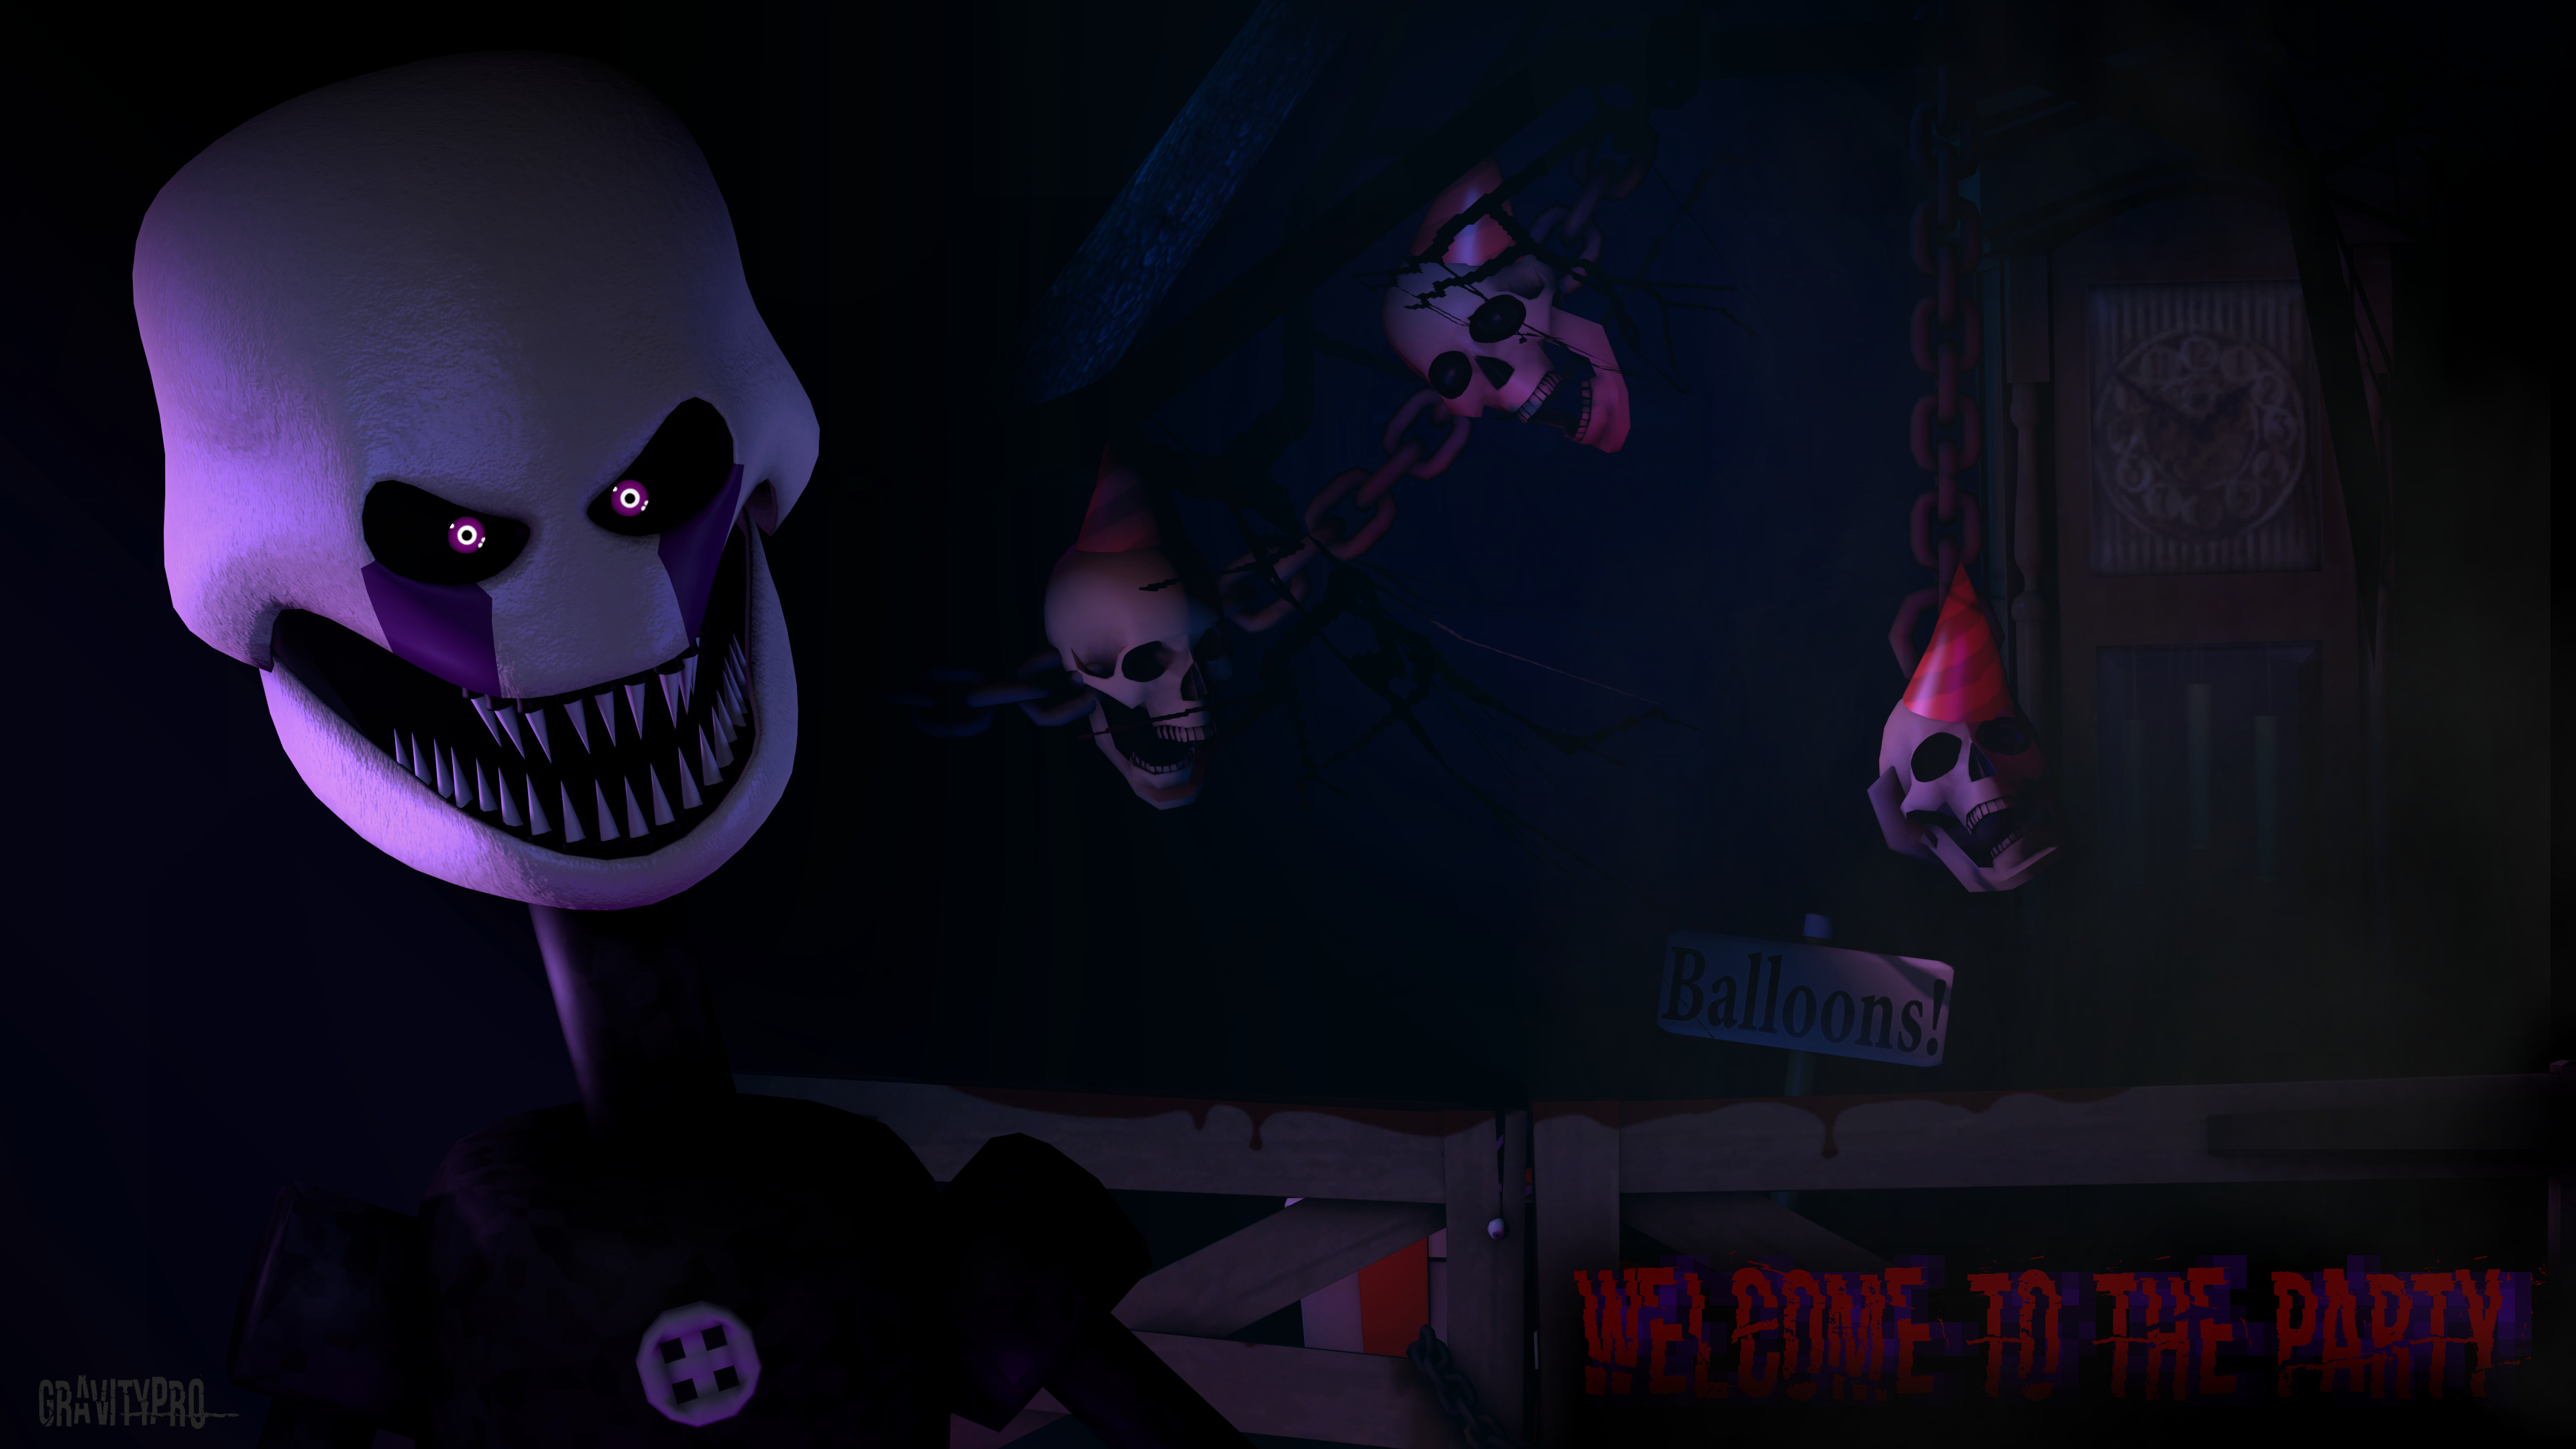 Welcome to the Party FNAF SFM, 4K Wallpaper by GravityPro